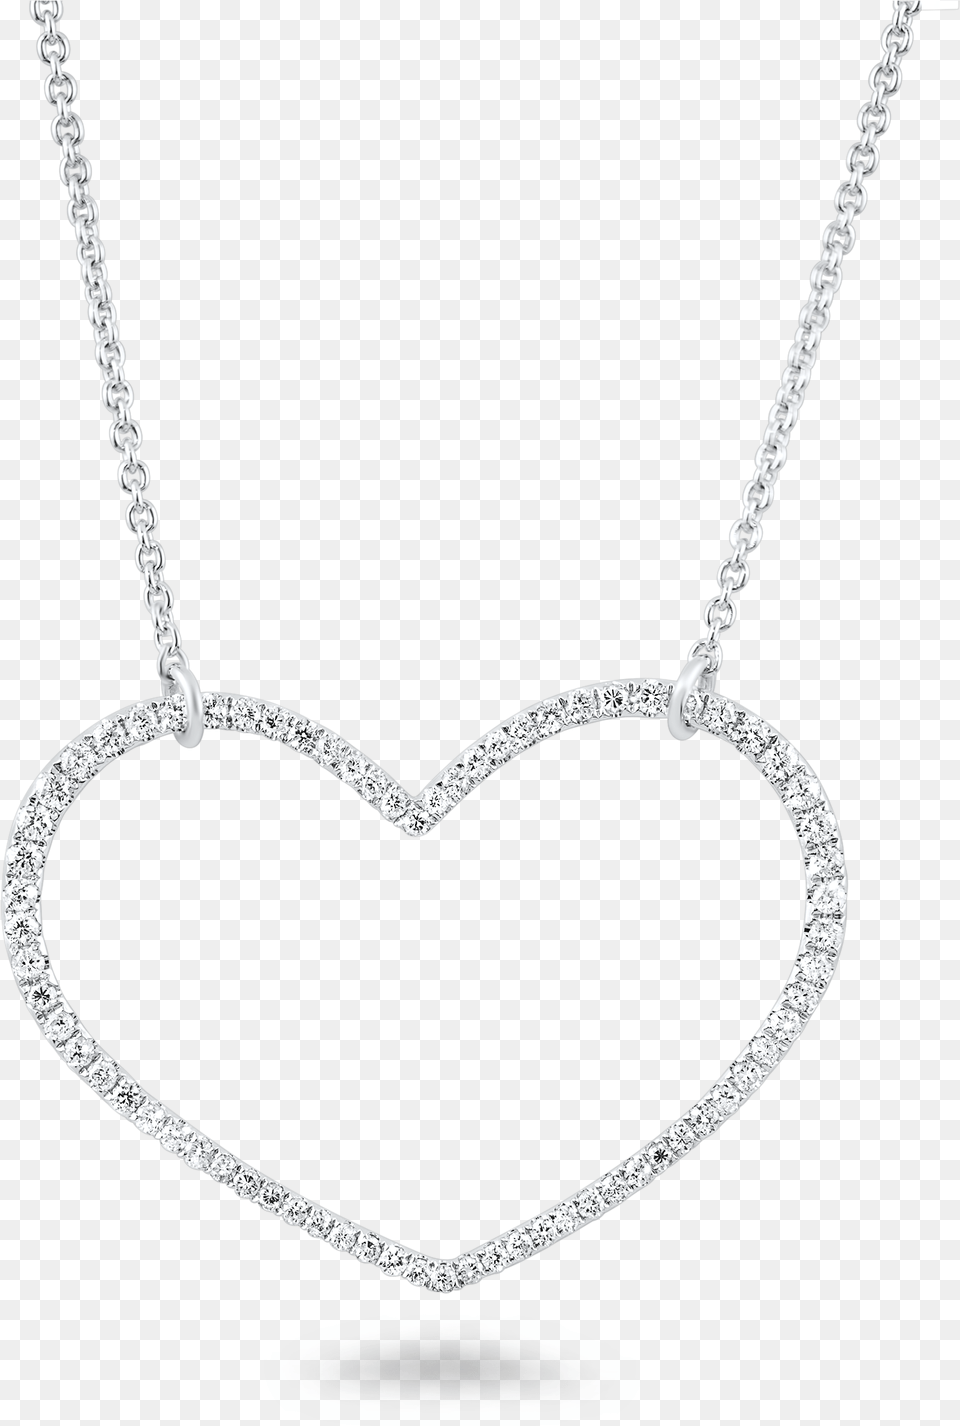 Diamond Heart Drawing At Getdrawings Brilliant, Accessories, Jewelry, Necklace, Gemstone Png Image